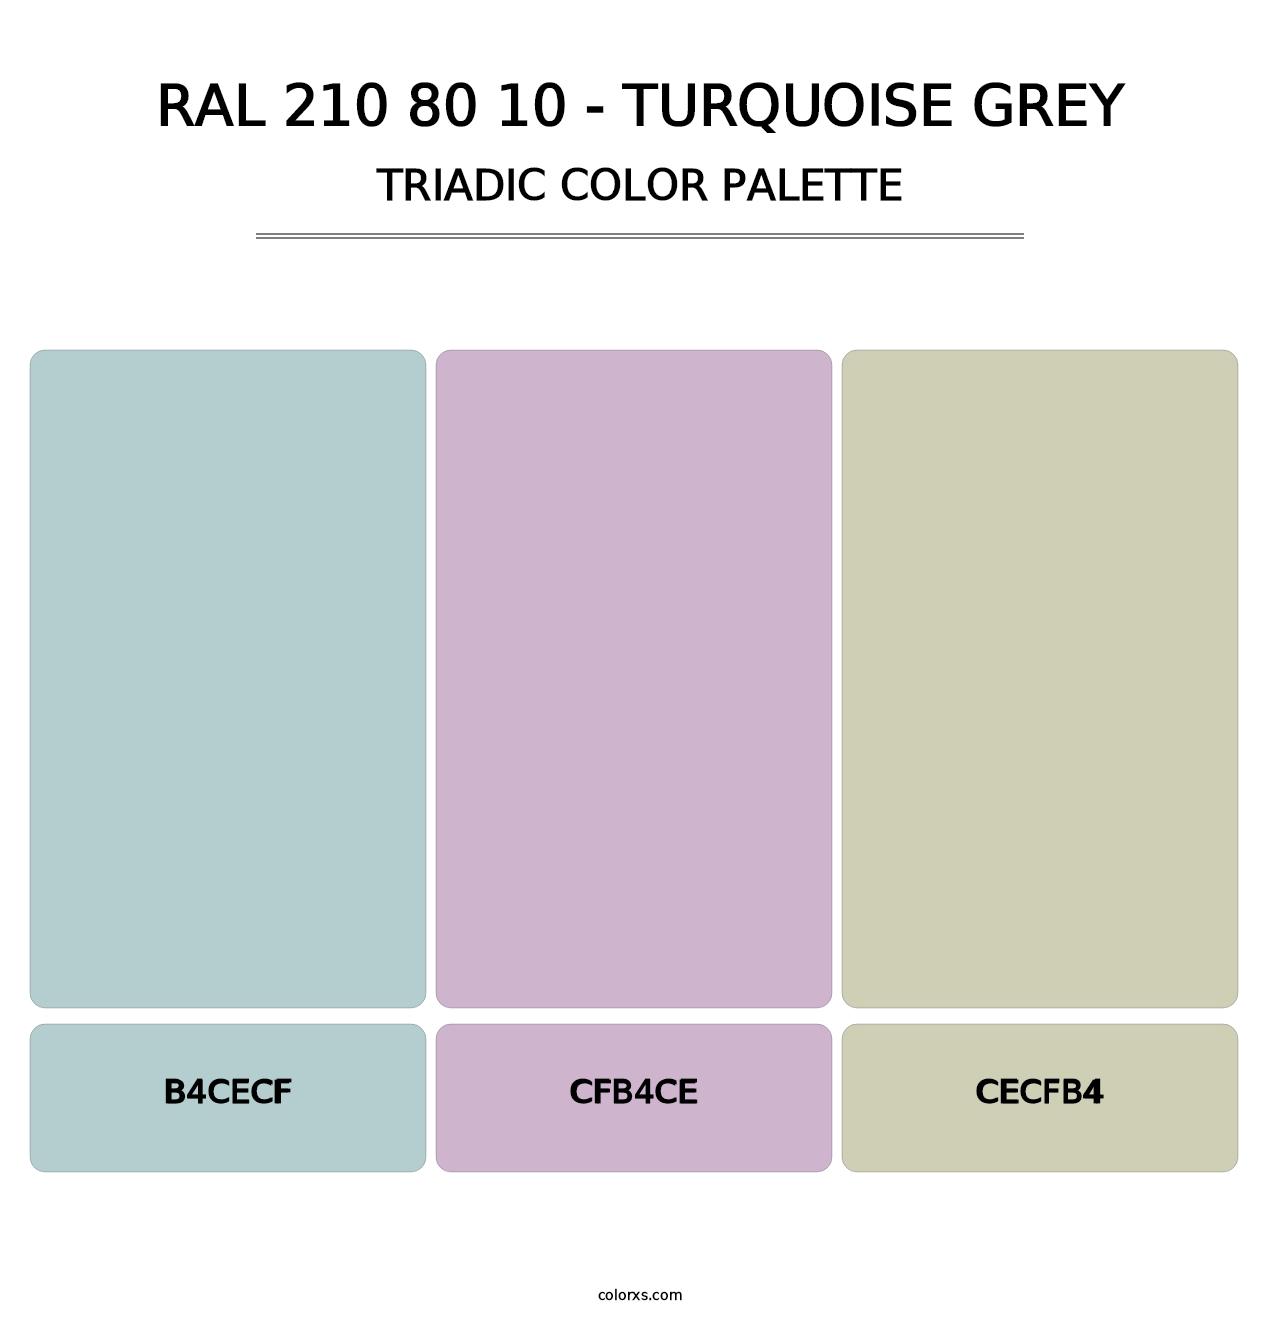 RAL 210 80 10 - Turquoise Grey - Triadic Color Palette